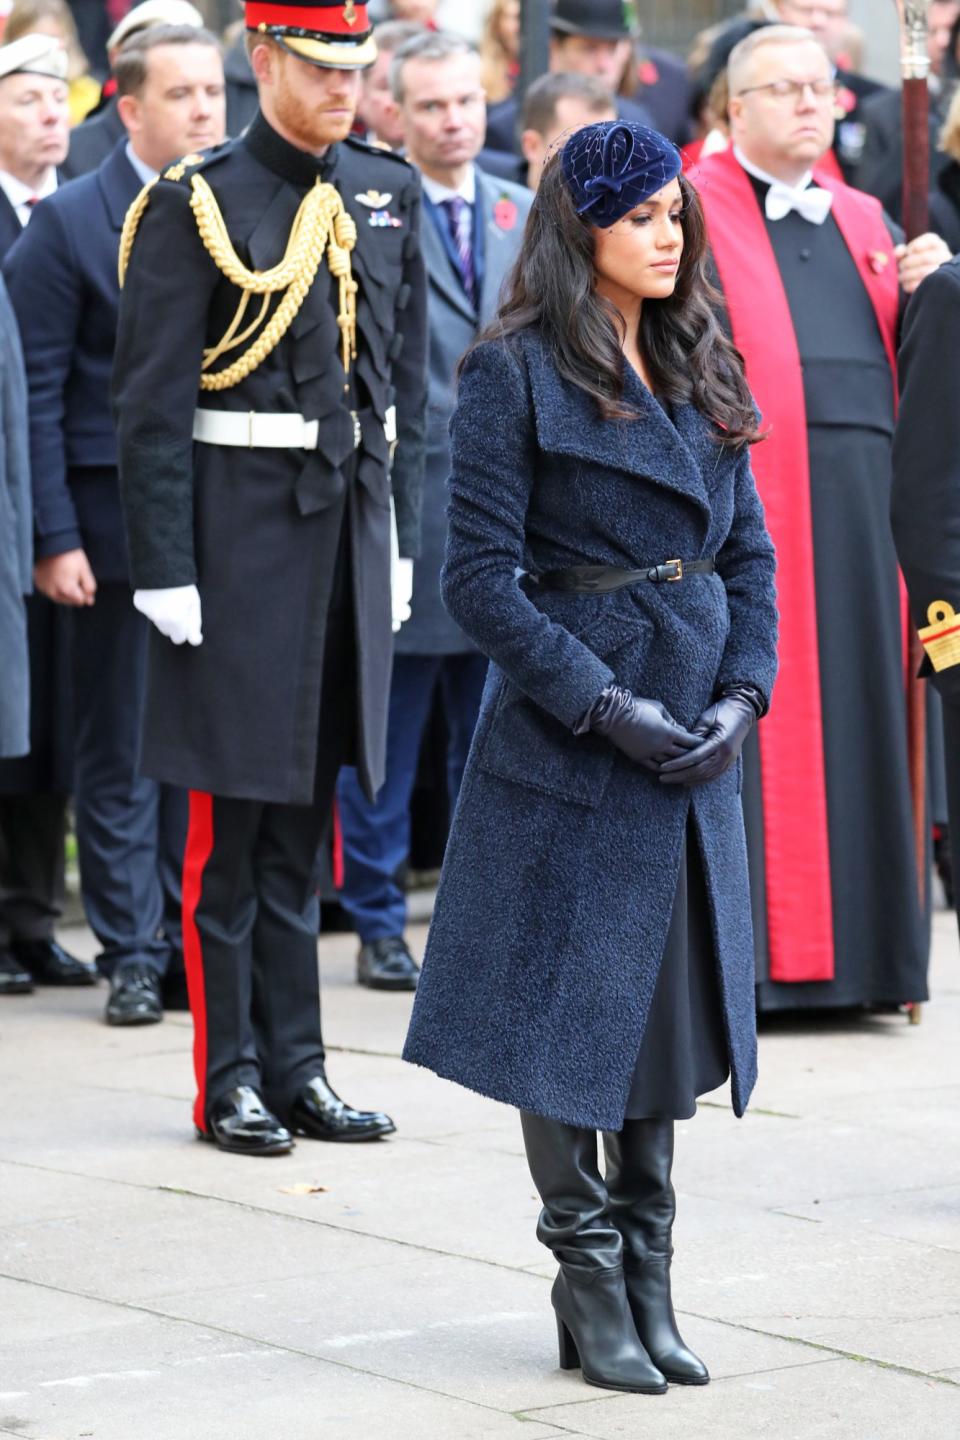 Meghan bundled up in a navy teddy coat while paying tribute to fallen soldiers at the the Field of Remembrance at Westminster Abbey. She topped off the look with a chic fascinator by Philip Treacy.